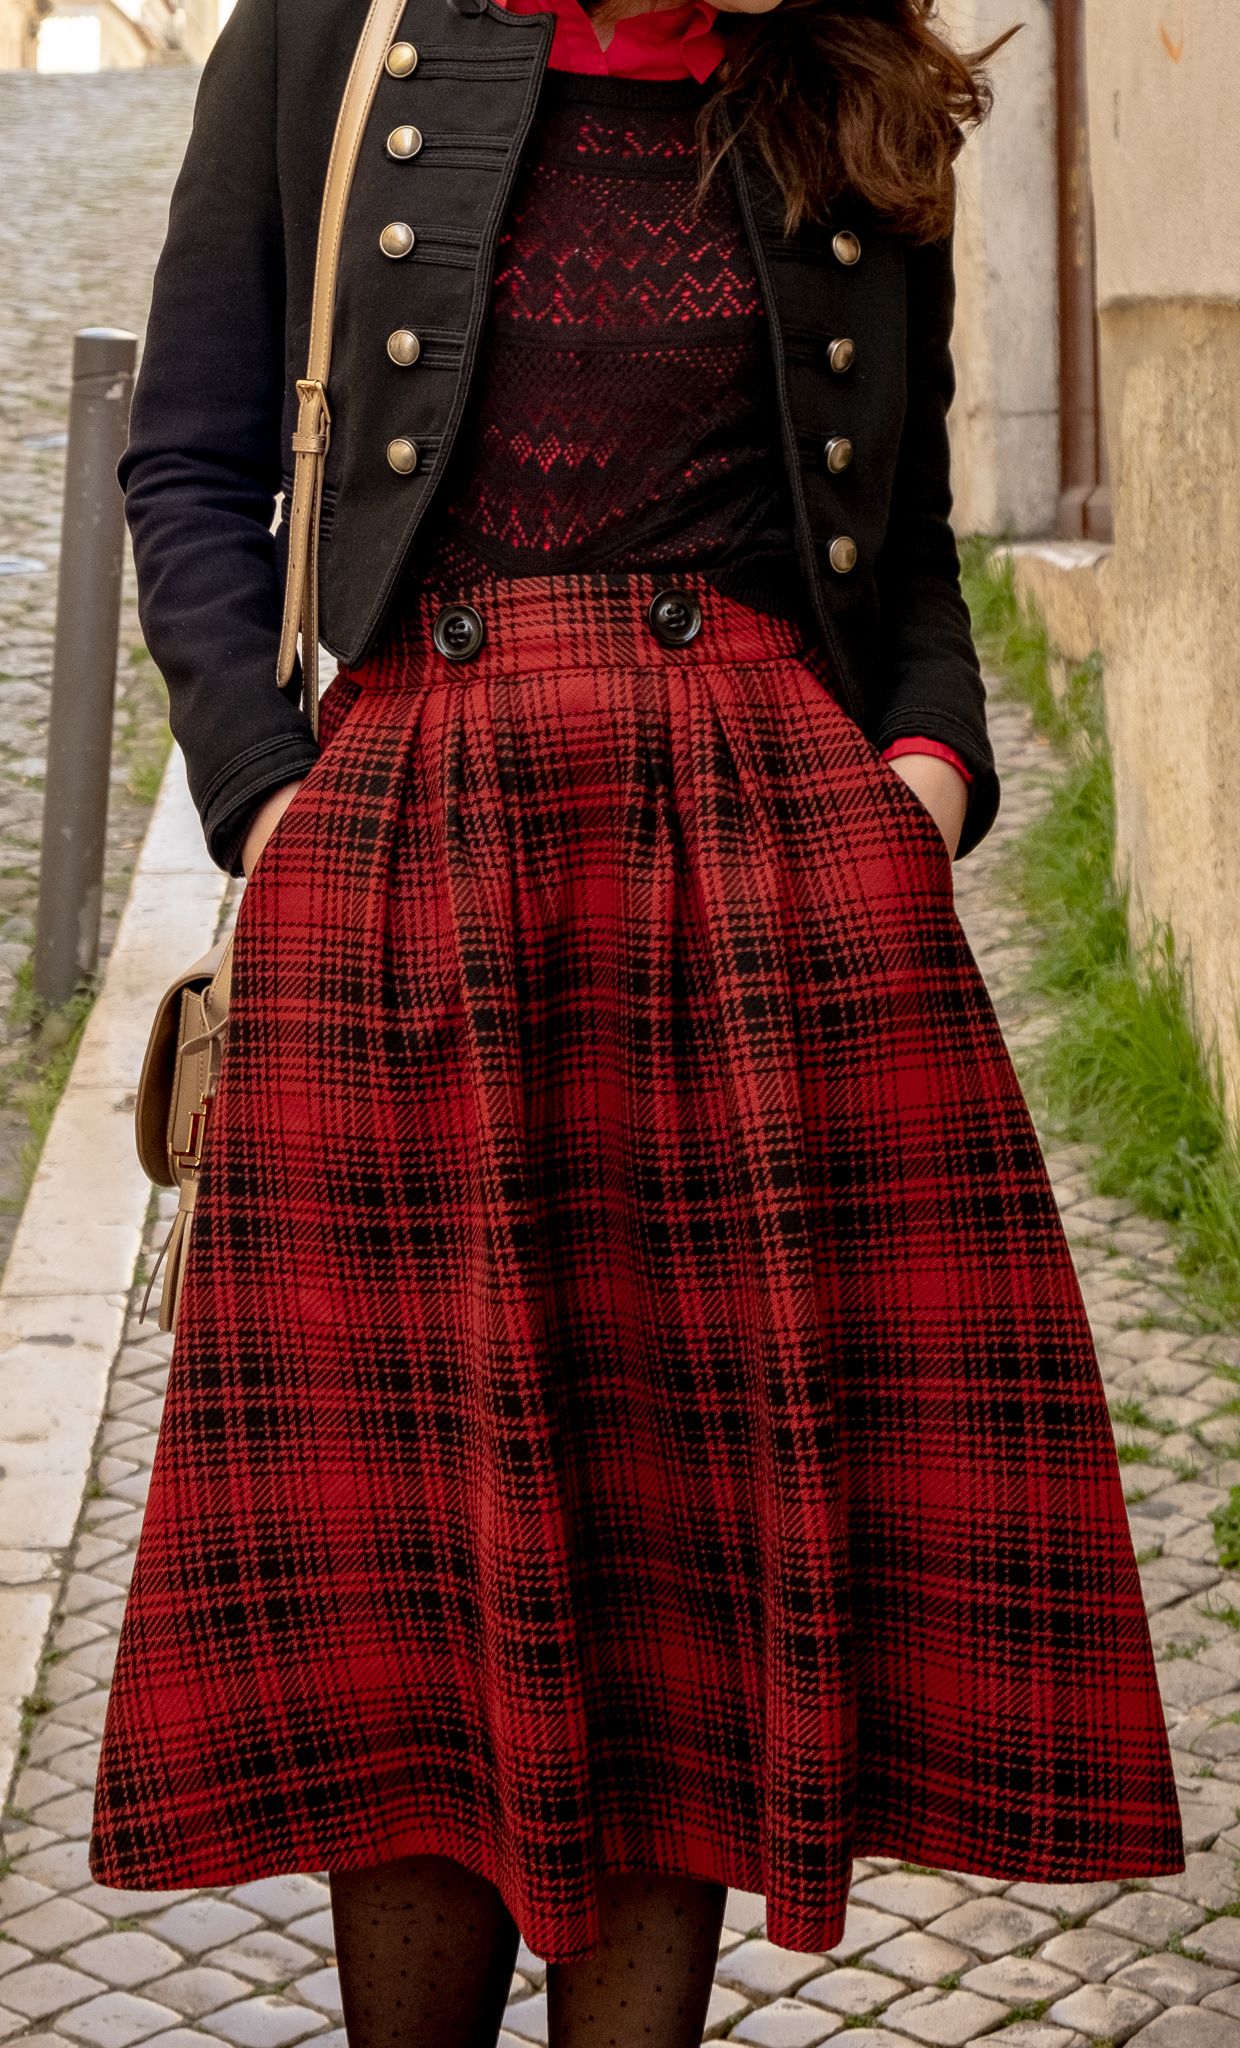 Chic and Stylish: Plaid Skirts for Effortless Style